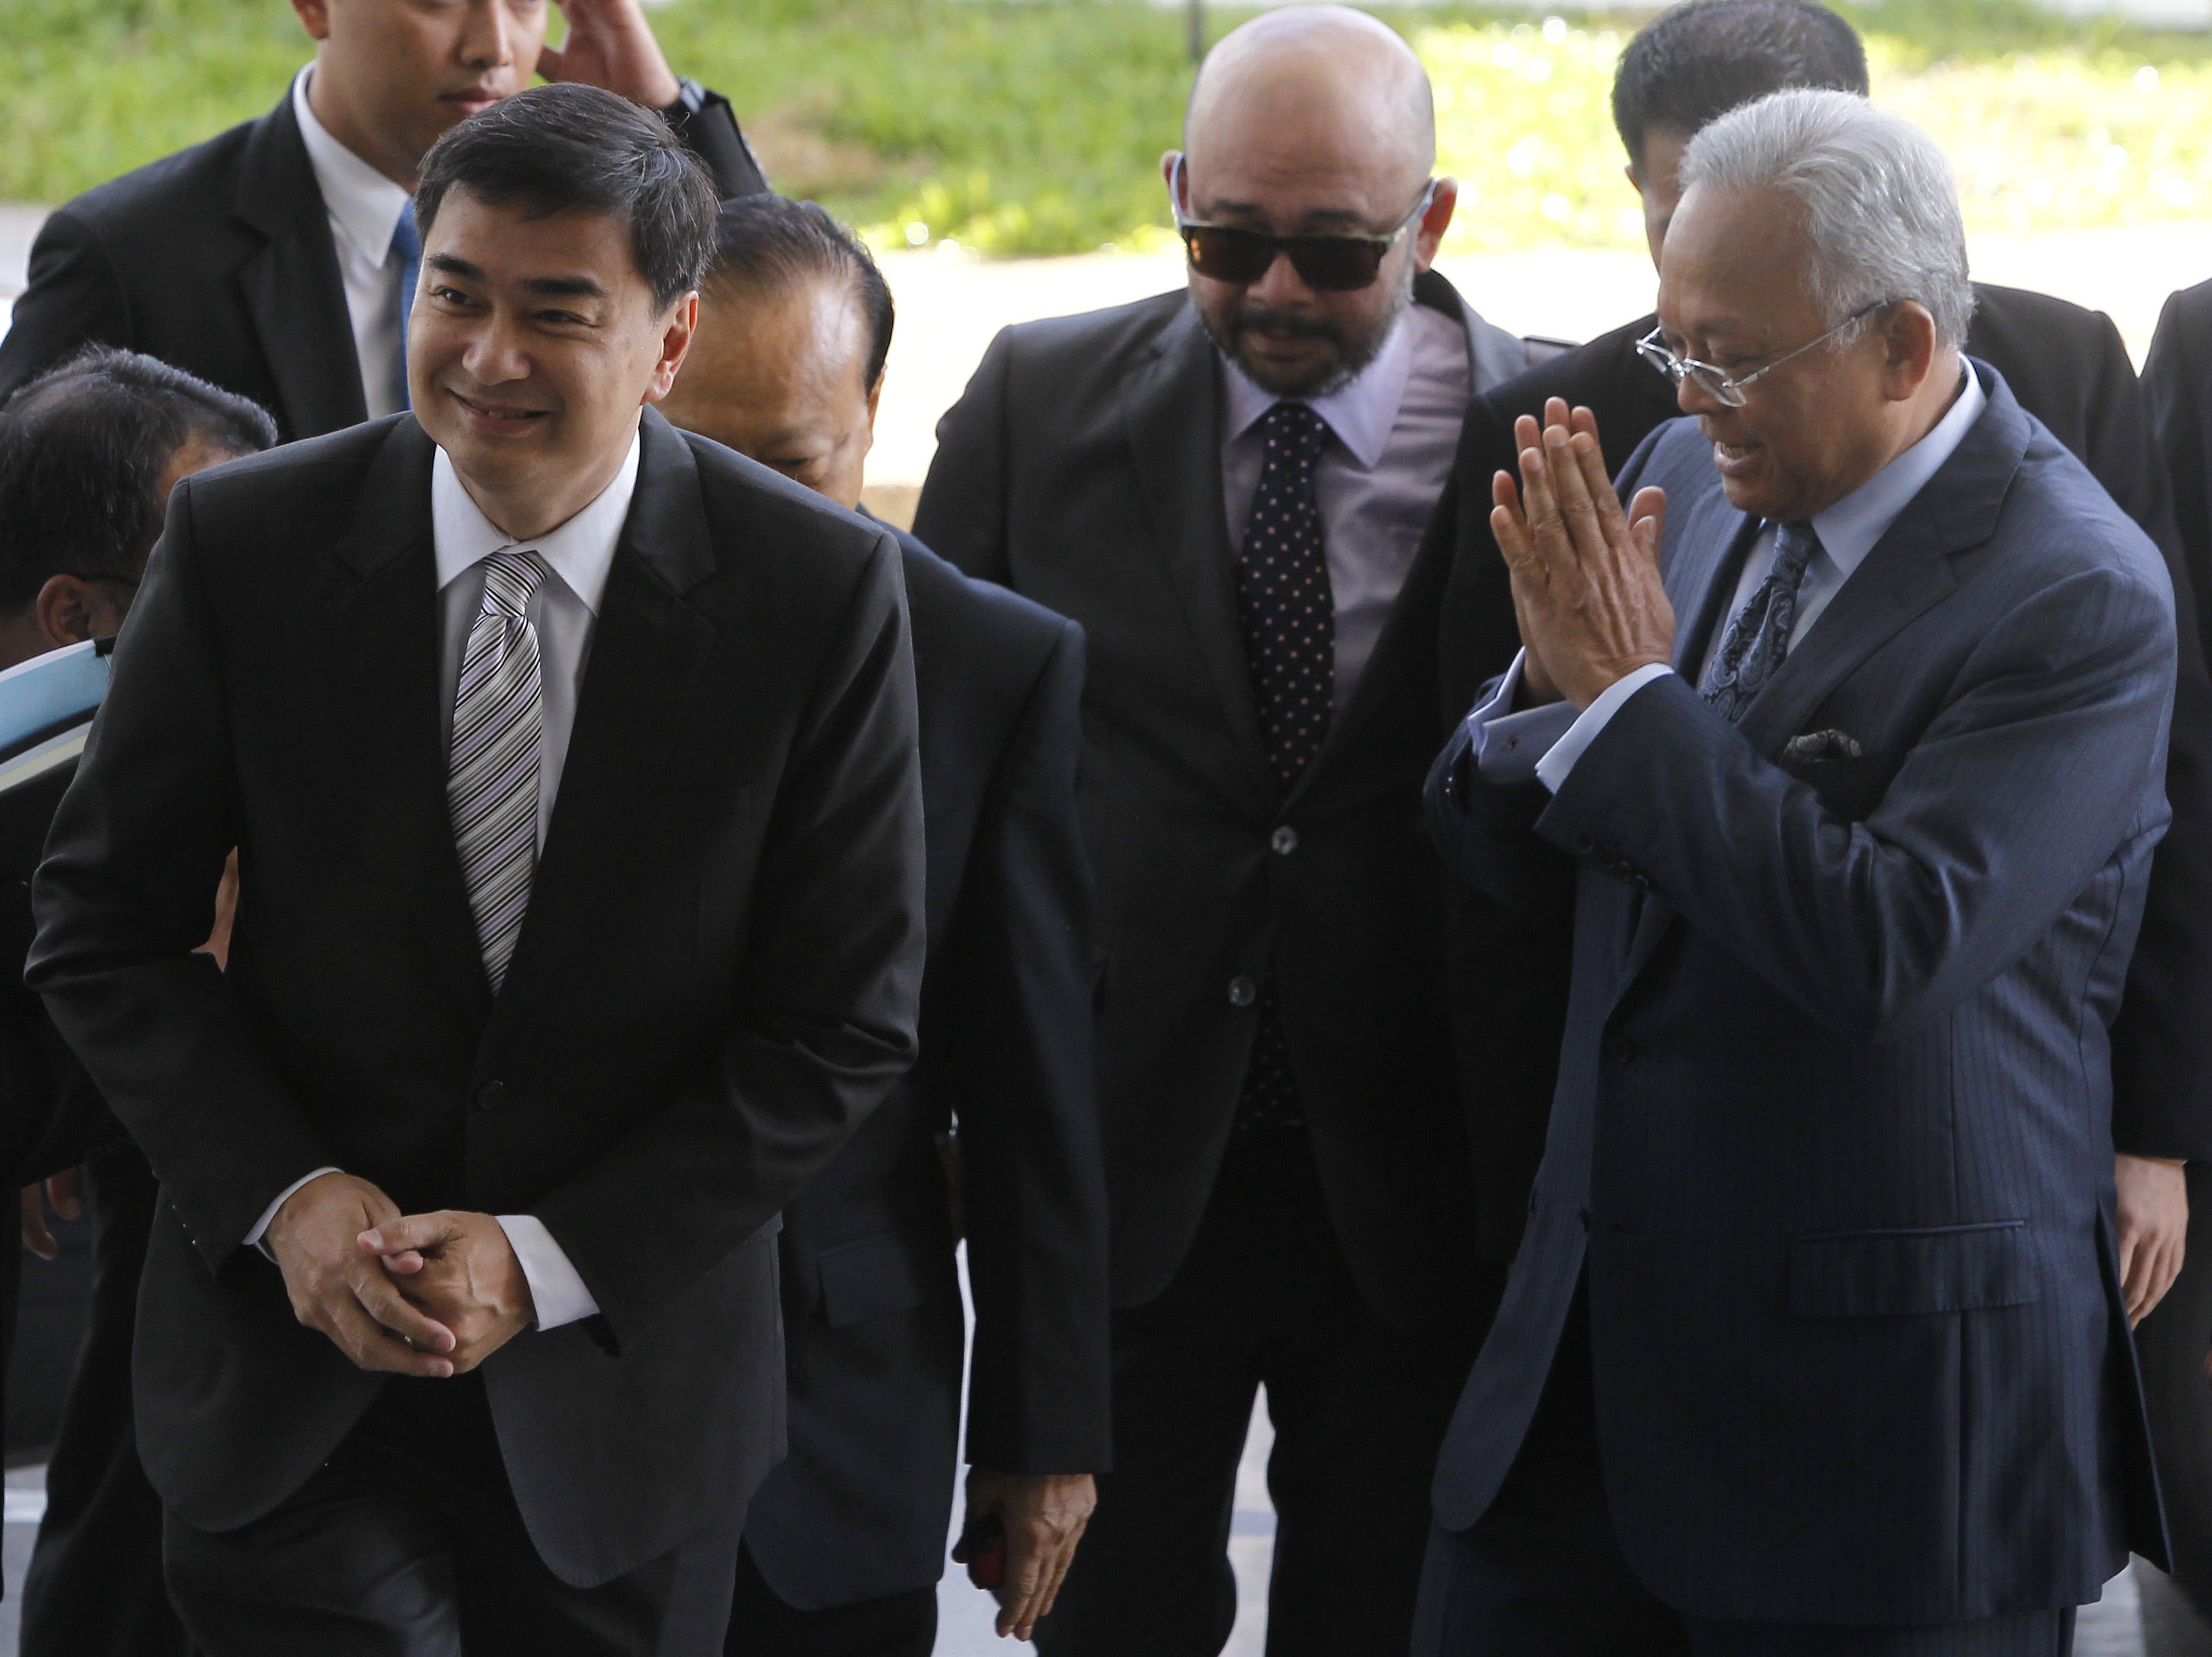 Former Thai Prime Minister Vejjajiva and his then deputy Thaugsuban arrive at the Department of Special Investigation in Bangkok